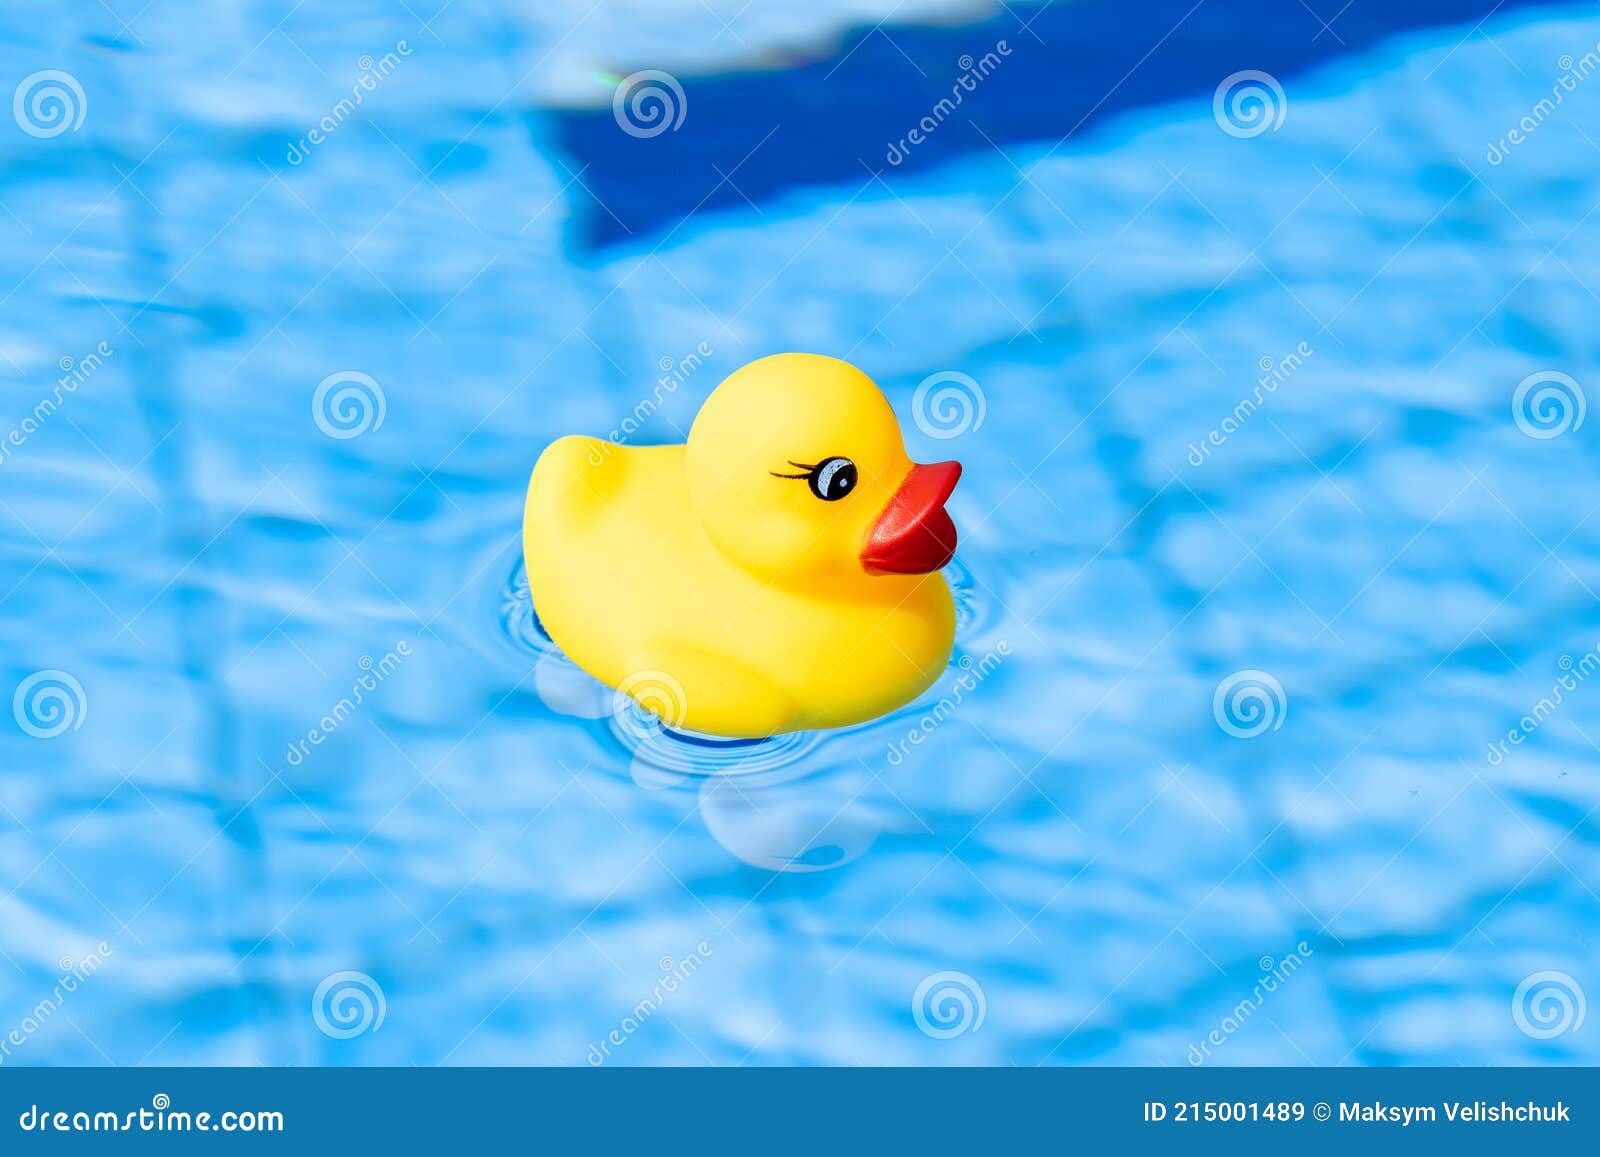 Funny Rubber Ducky. Yellow Inflatable Toy for Kids Swim in Blue Water of  Summer Pool Stock Image - Image of bikini, bath: 215001489